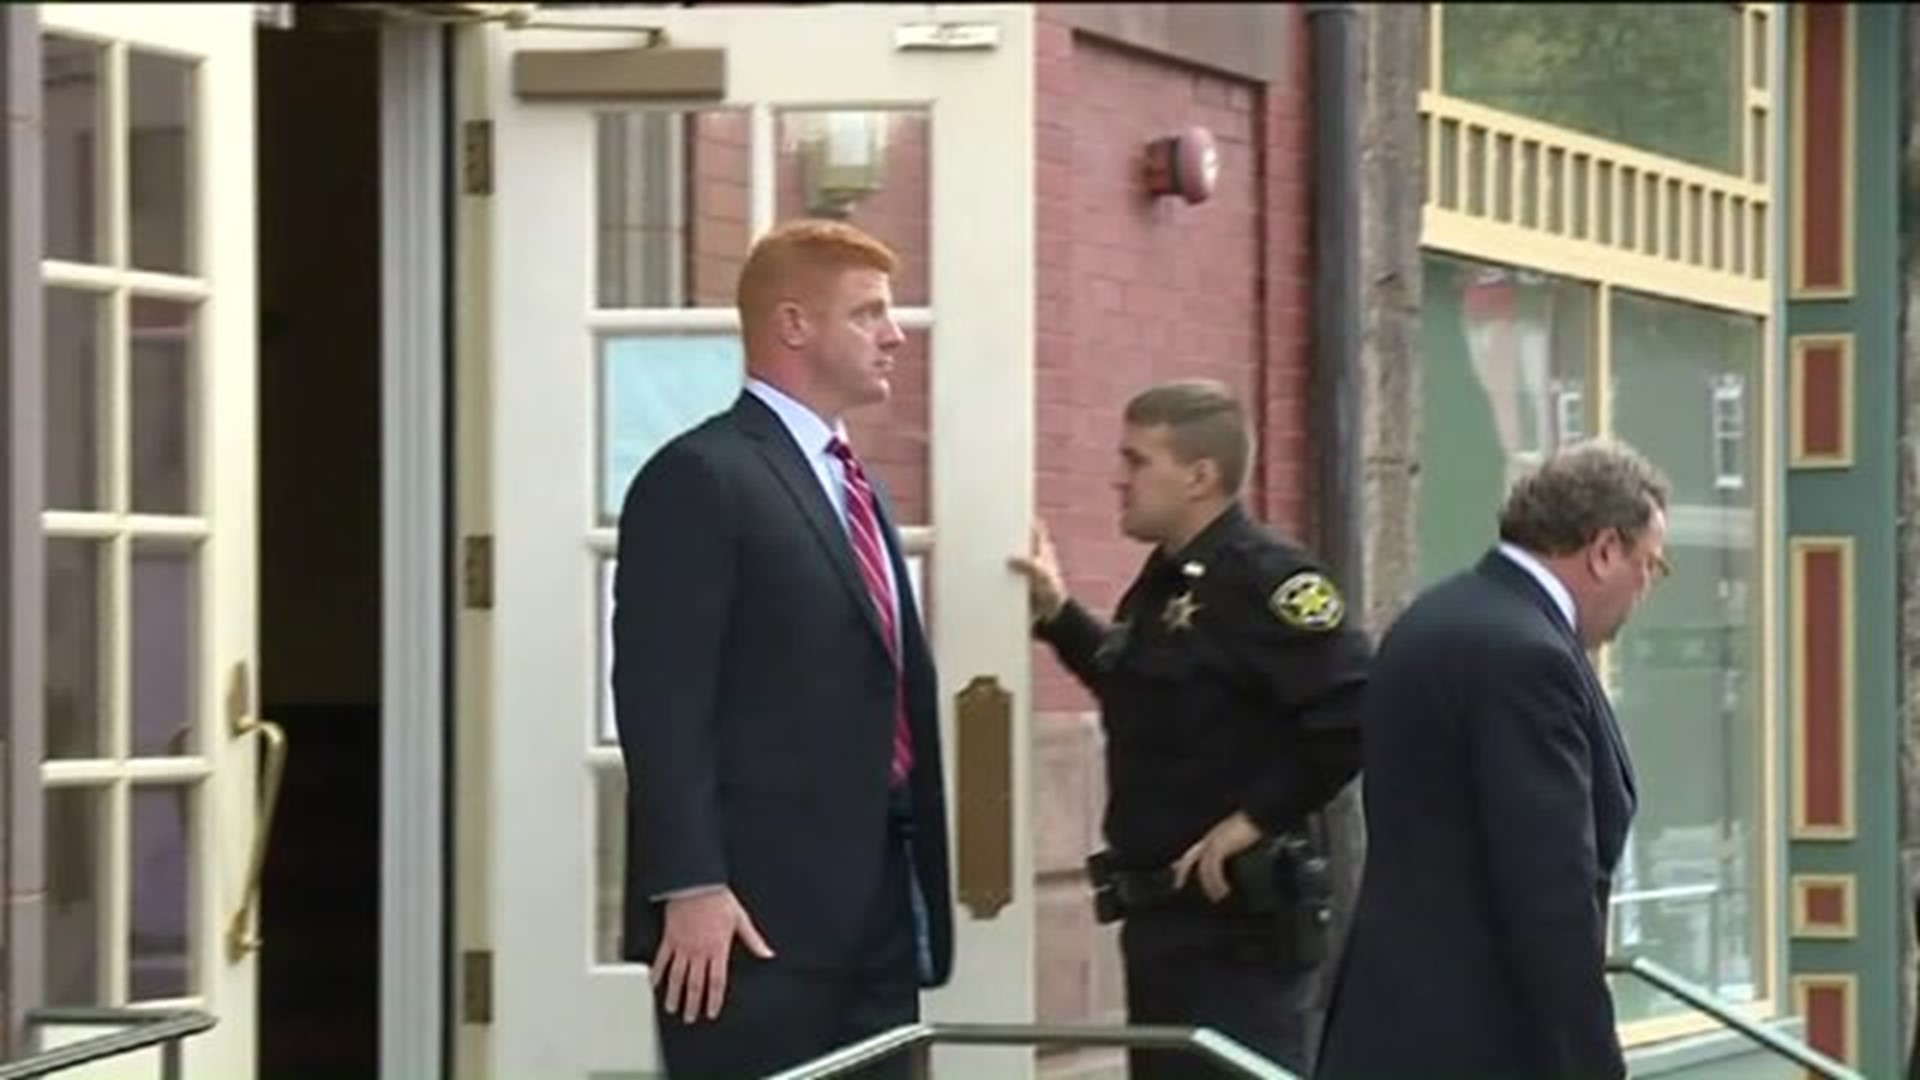 McQueary Whistleblower Lawsuit Against Penn State Goes to Trial